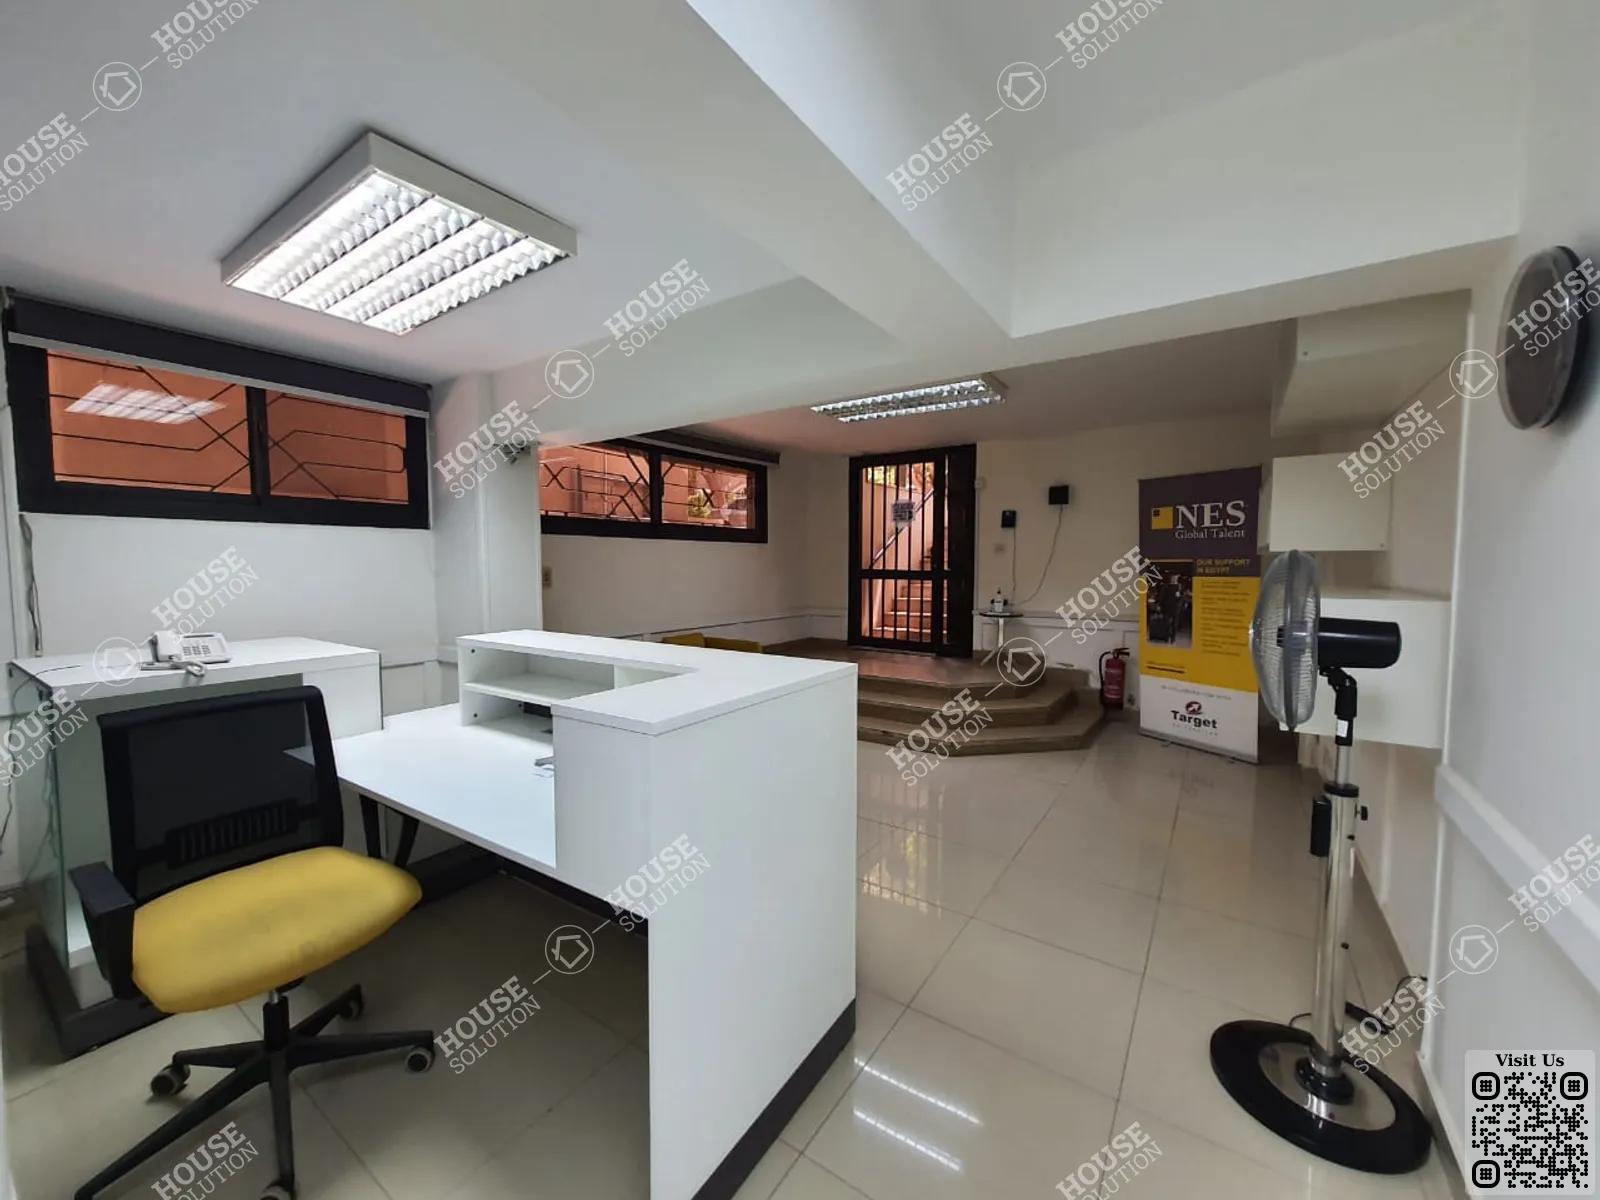 RECEPTION  @ Office spaces For Rent In Maadi Maadi Sarayat Area: 220 m² consists of 7 Bedrooms 2 Bathrooms Semi furnished 5 stars #5474-0